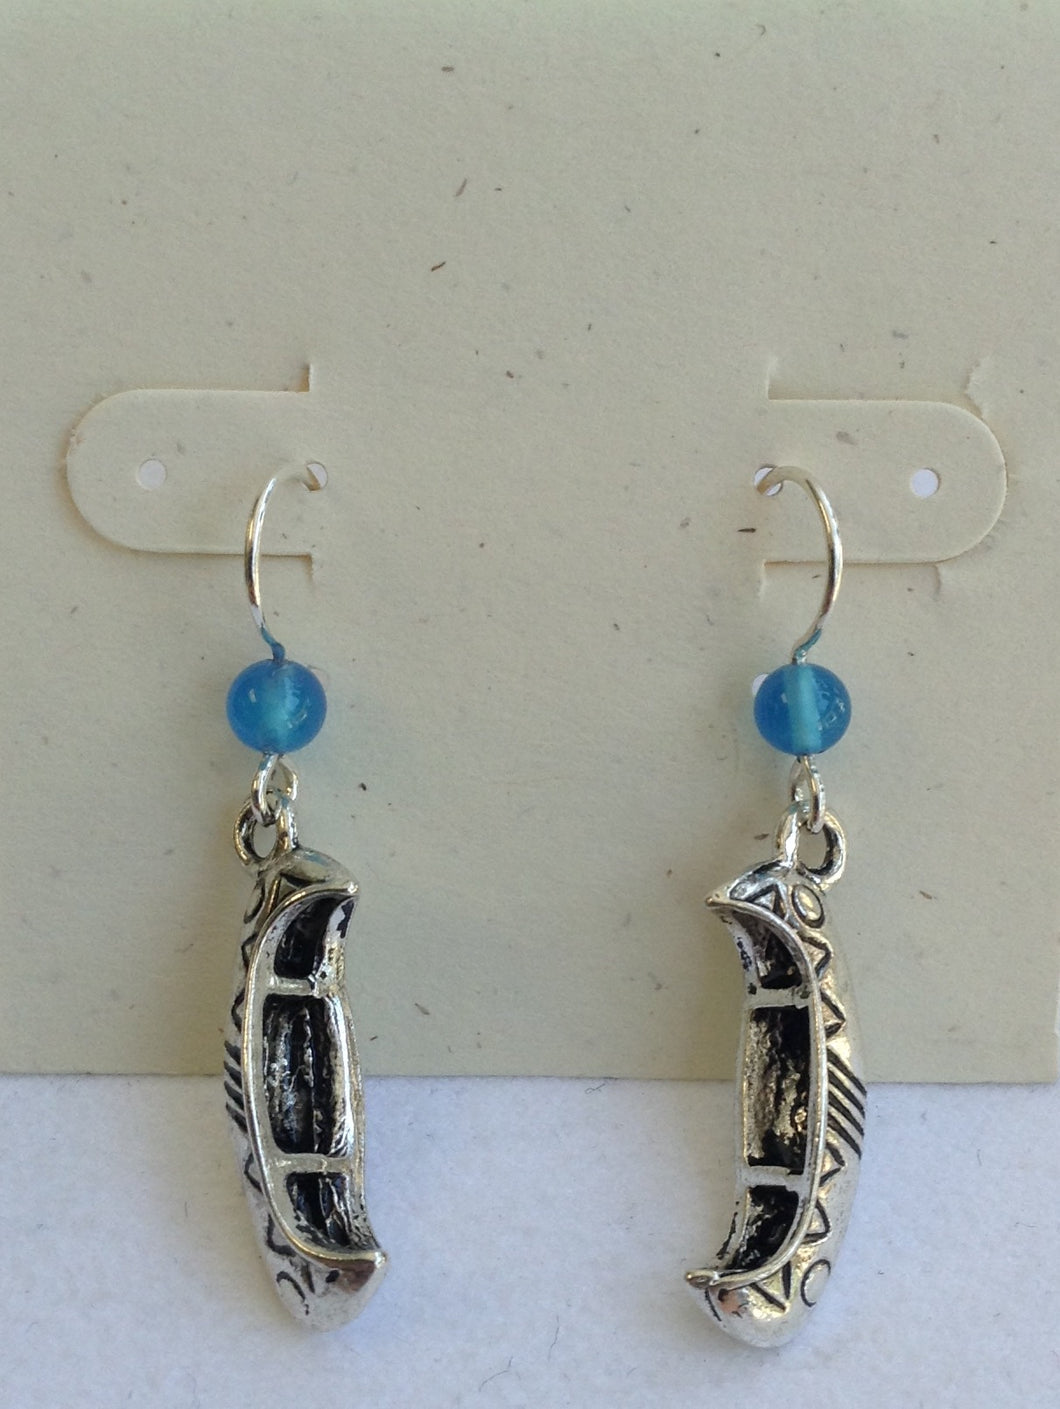 Canoe earrings - Lively Accents